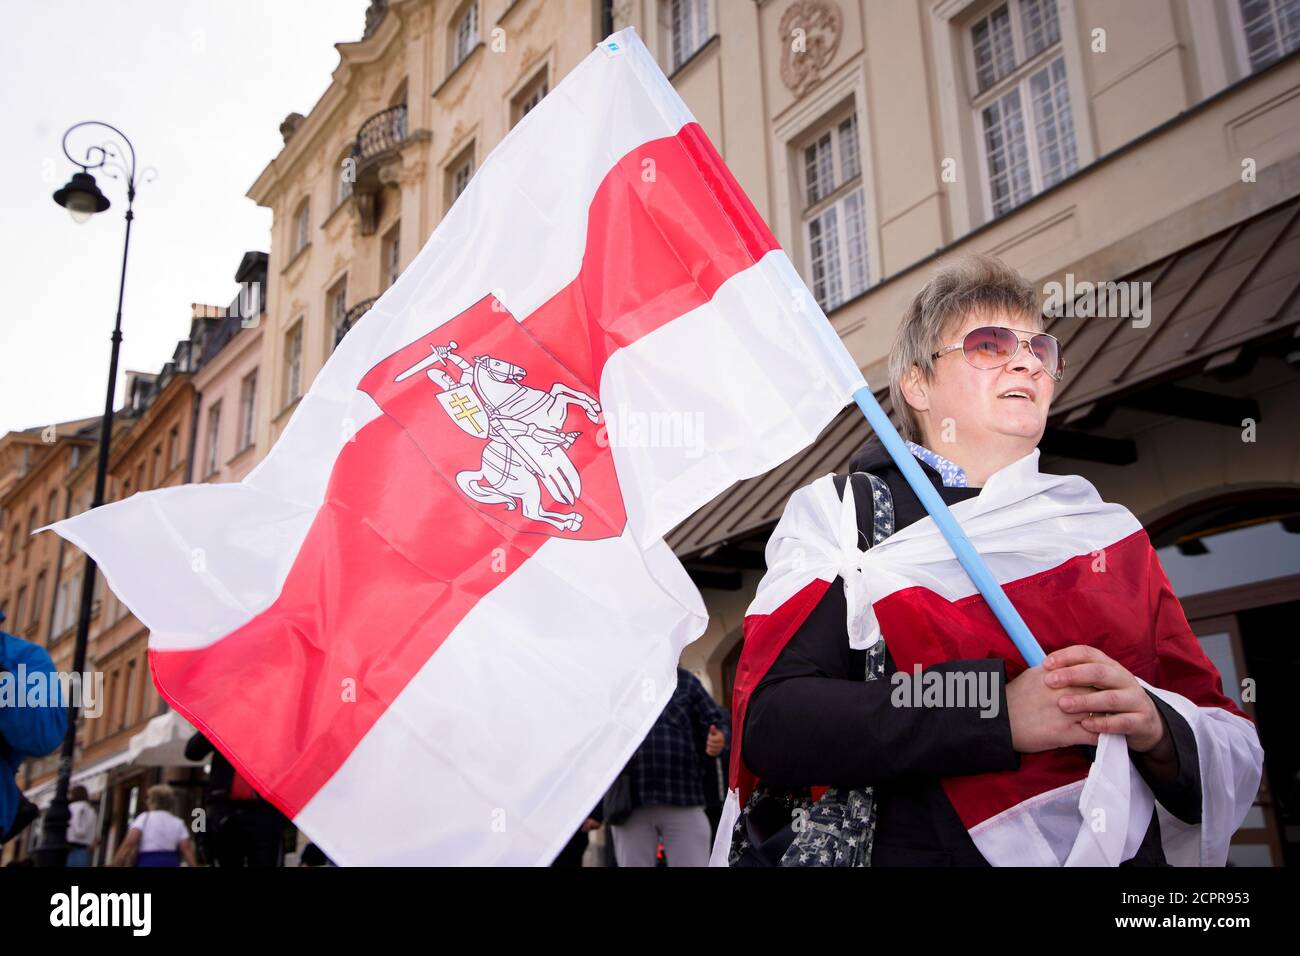 A woman is seen holding the Belarusian White-Red-White flag with the Pogon symbol in Warsaw, Poland on September 19, 2020. Several dozen people, mostl Stock Photo